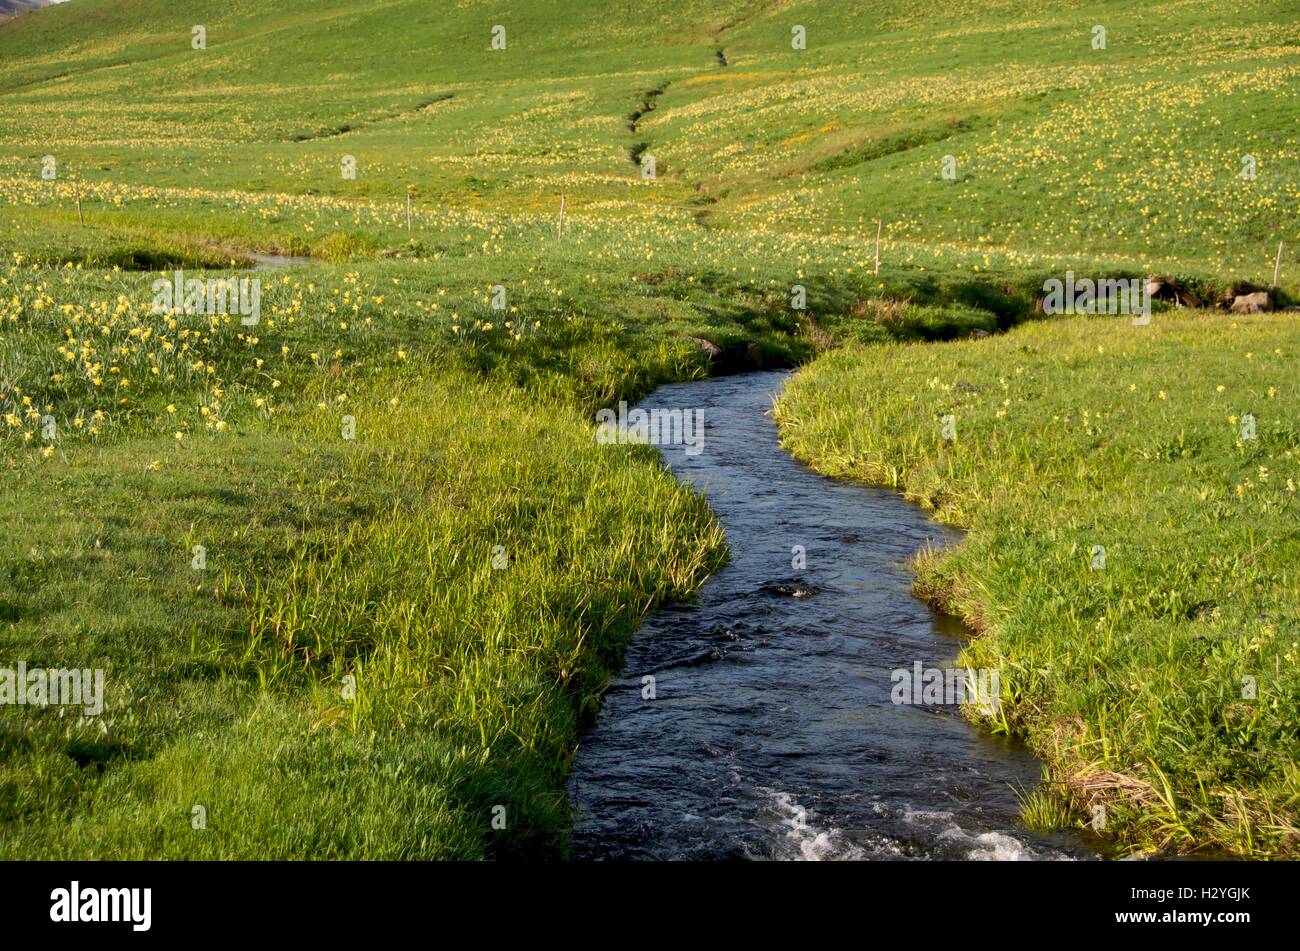 Small stream in Cezallier and field of daffodils, Auvergne, France, Europe Stock Photo